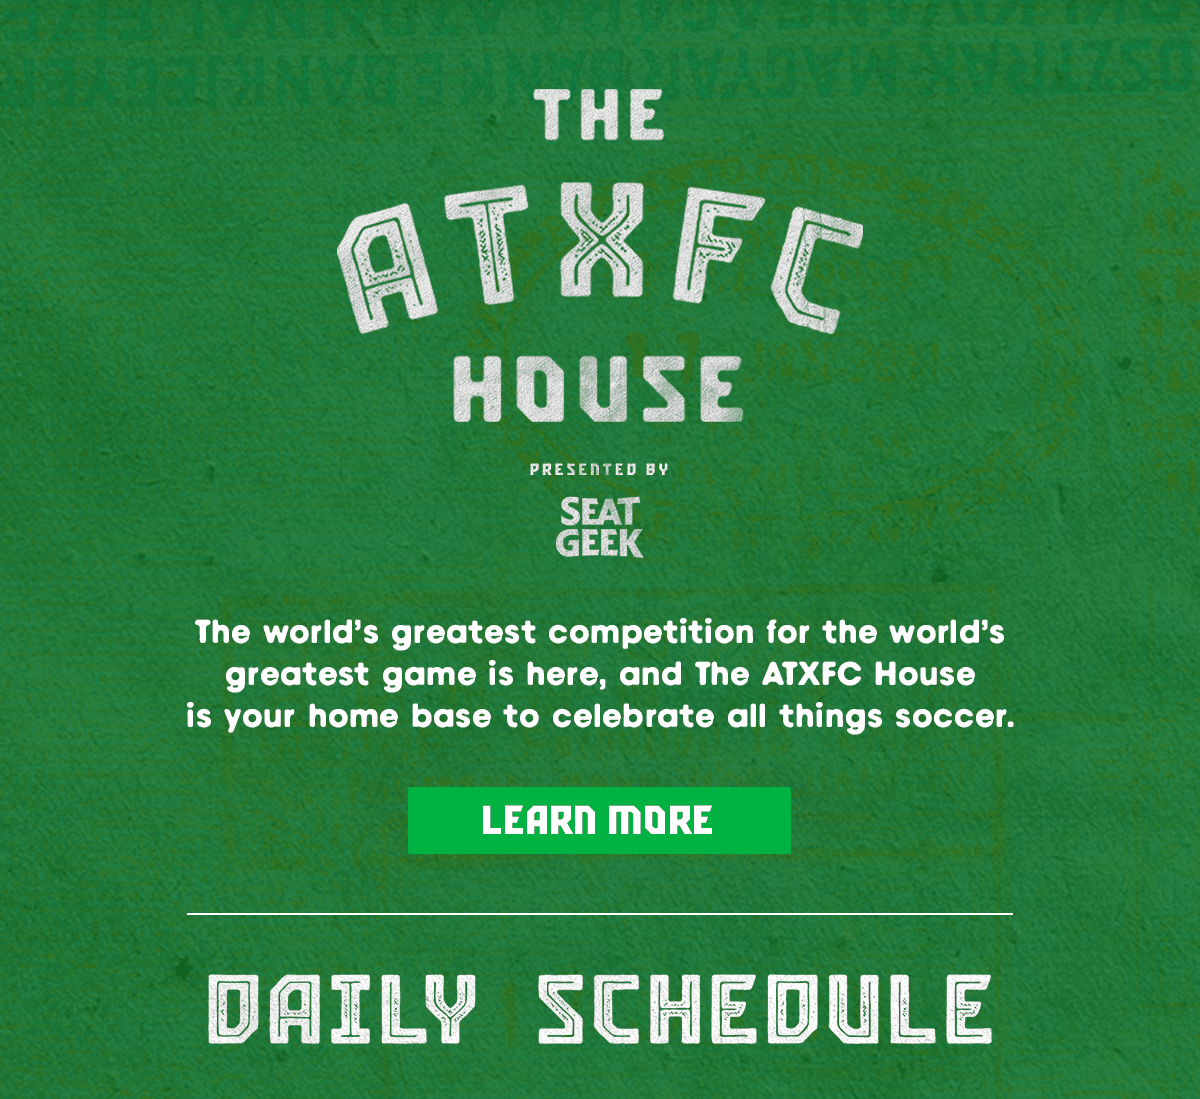 The ATXFC House